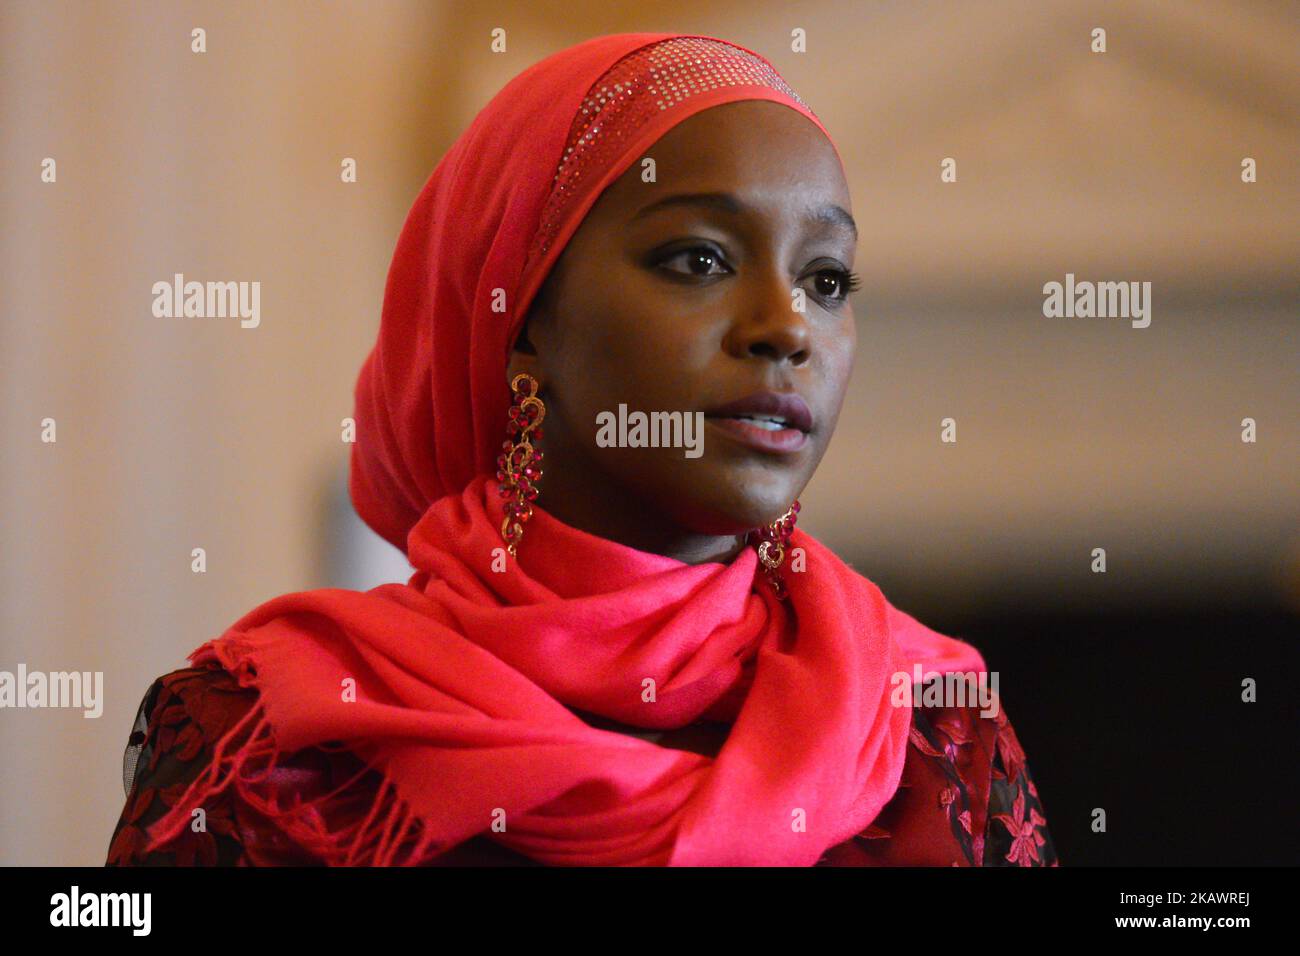 American actress, Aja Naomi King, during an on set photo call, which has just commenced in Dublin for the Pembridge Pictures and Umedia production of ‘A Girl from Mogadishu’ – a true story based on the testimony of Ifrah Ahmed. Born into a refugee camp in war-torn Somalia, Ifrah was trafficked to Ireland as a teenager. Recounting her traumatic childhood experiences of Female Genital Mutilation / Cutting (FGM/C) when applying for refugee status, she was again traumatized and decided to devote her life to the eradication of the practice. Ifrah emerged as one of the world’s foremost internationa Stock Photo